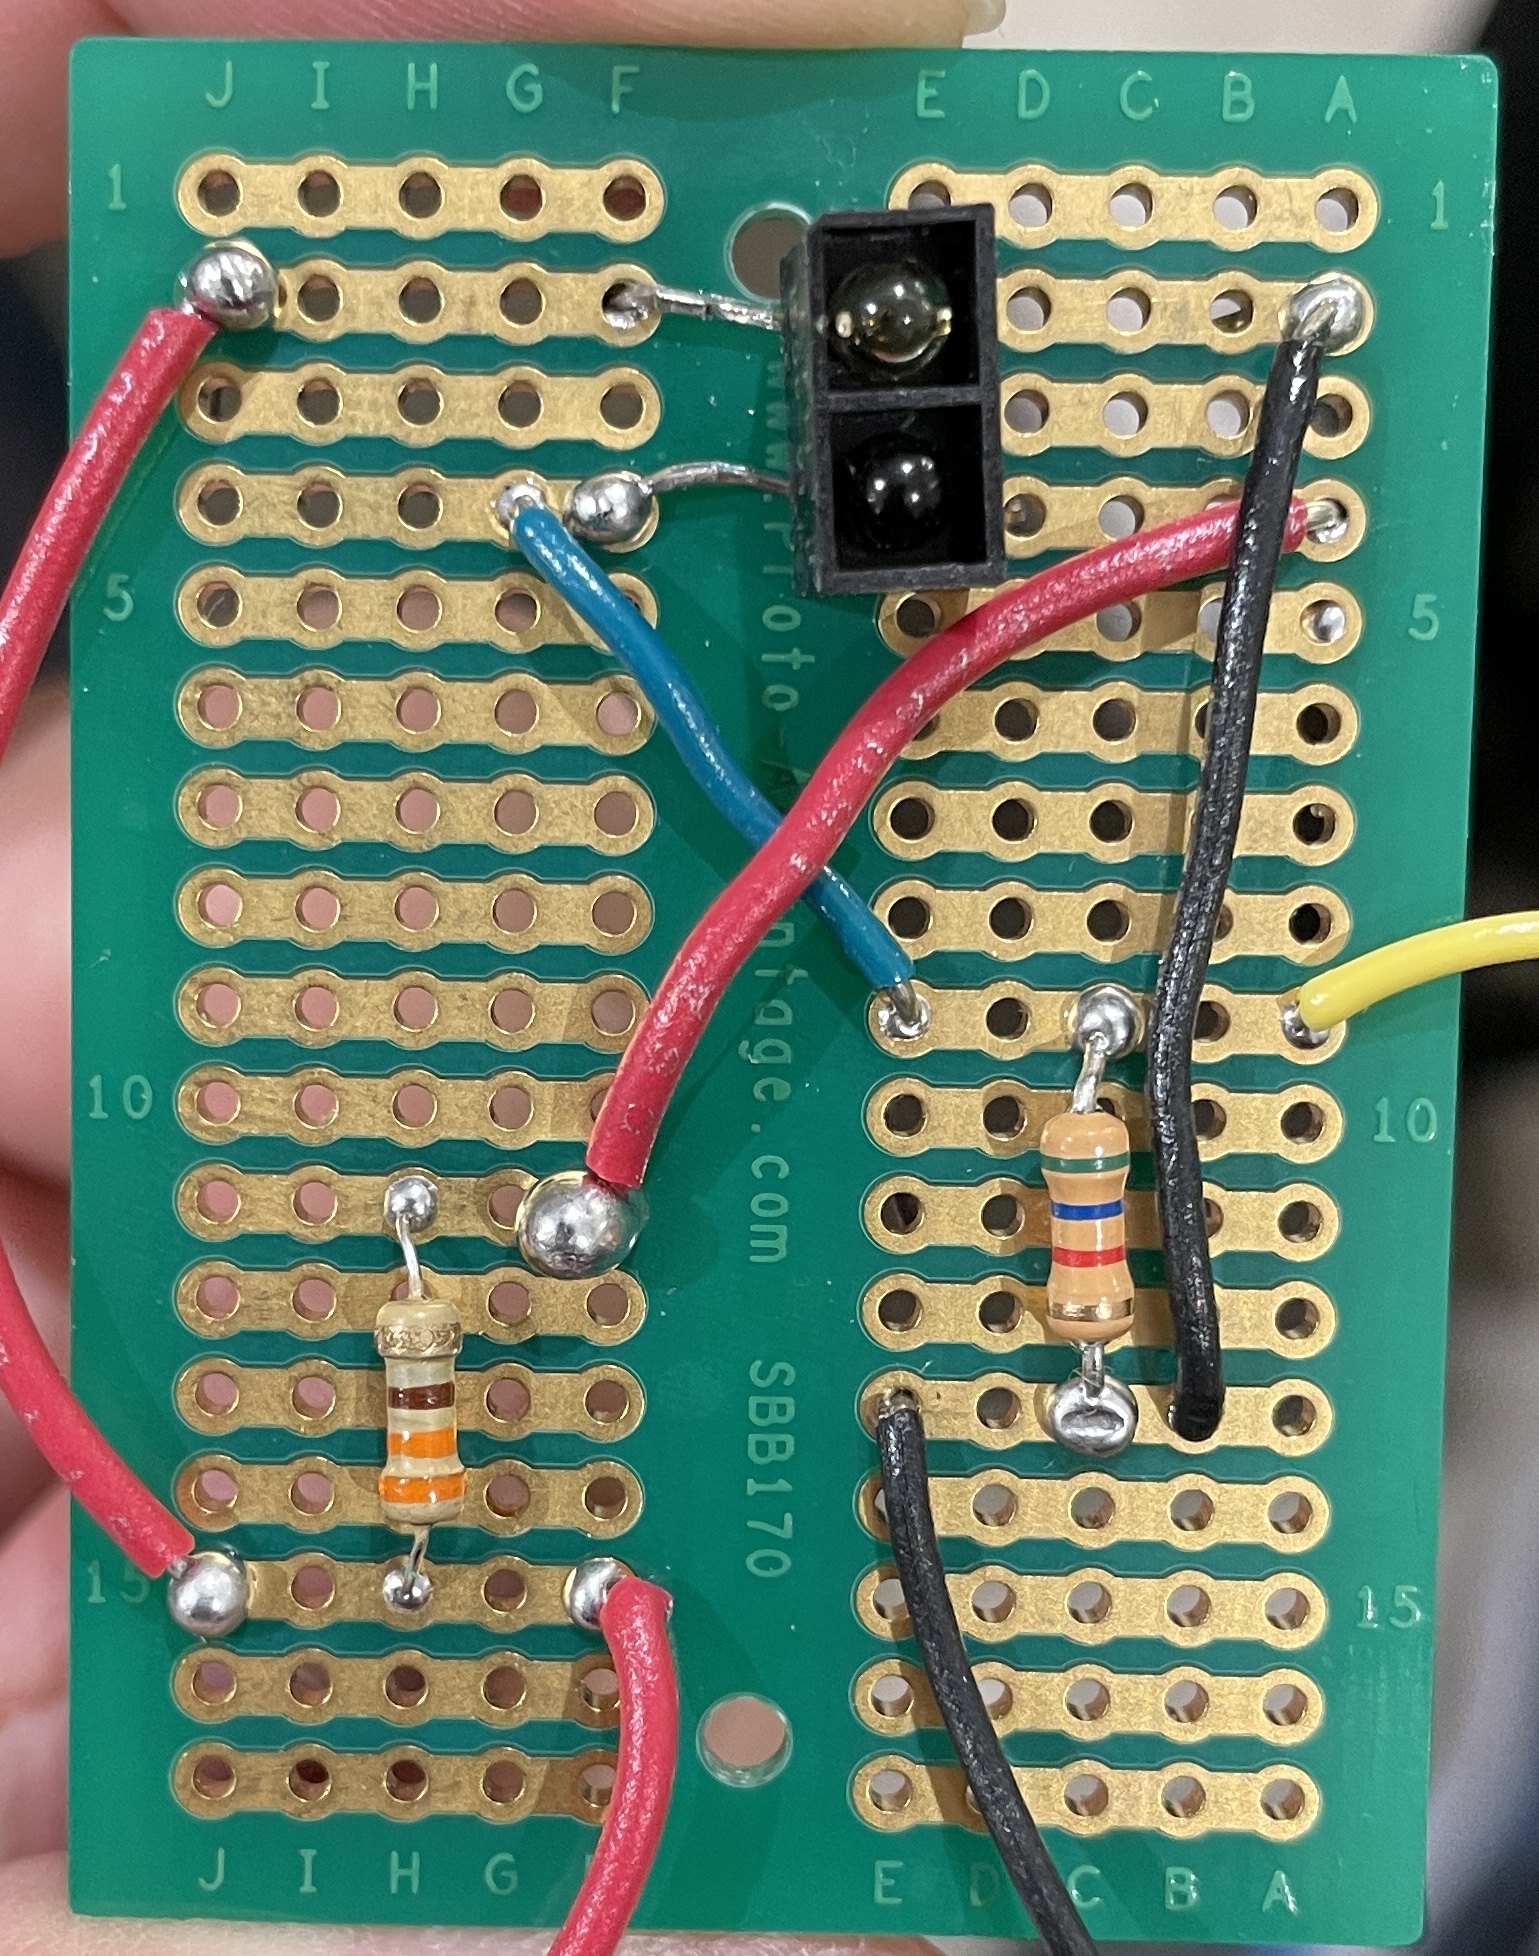 A protoboard with a faulty circuit soldered onto it which led to short-circuiting.